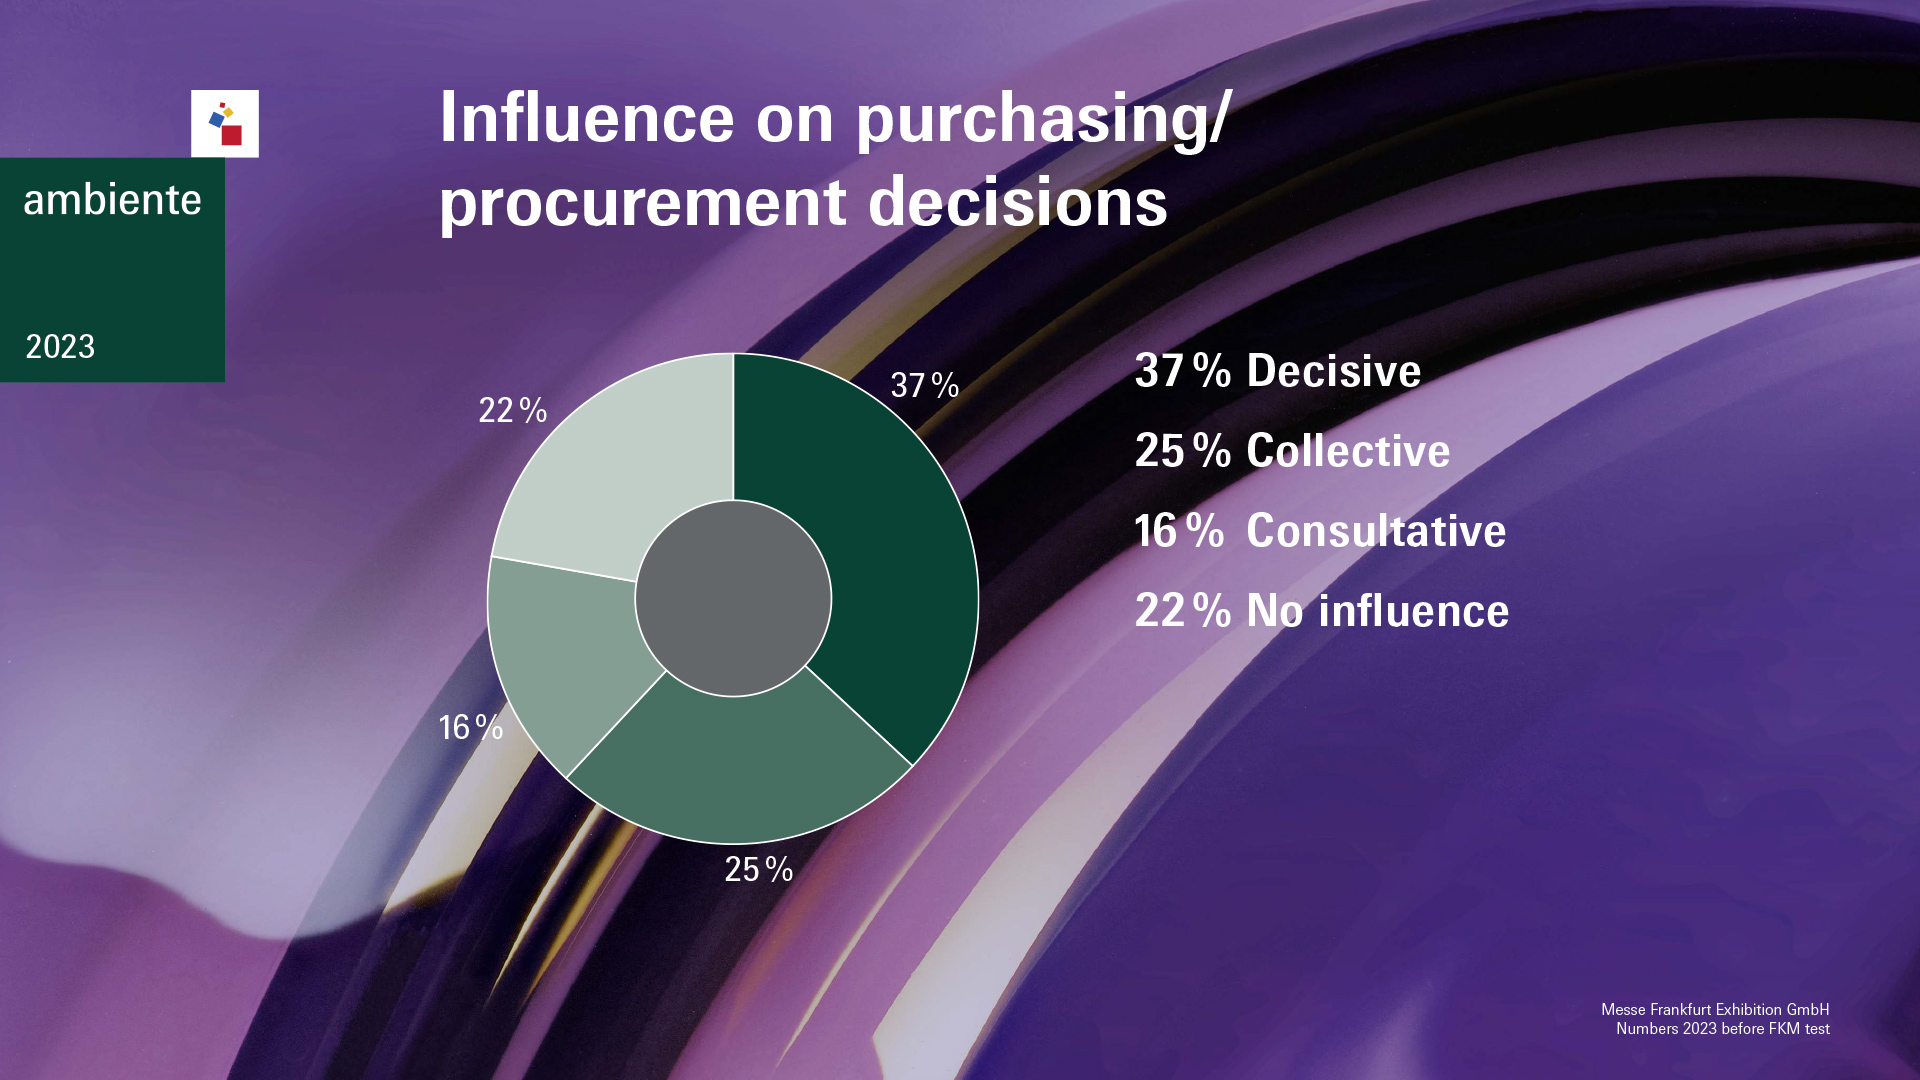 Ambiente 2023: influence on purchasing/procurement decisions